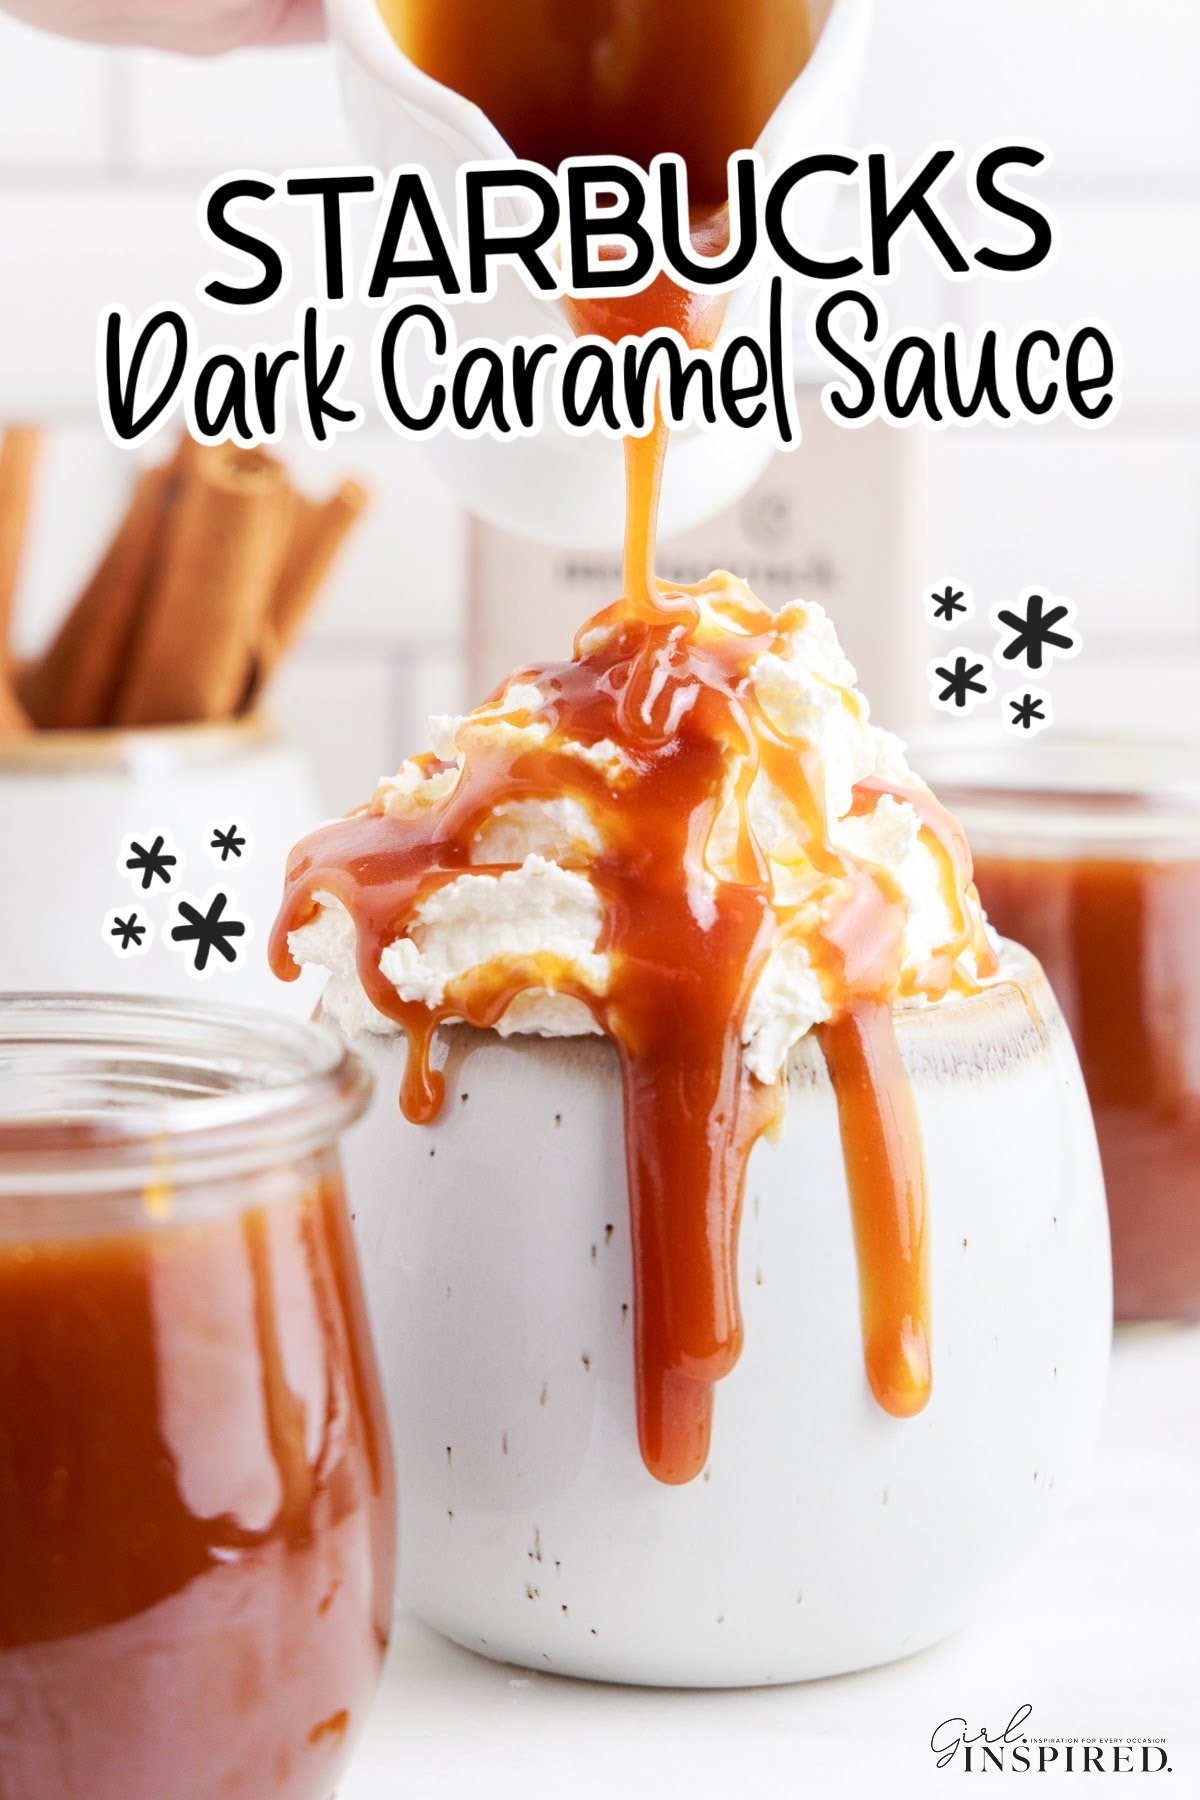 Starbucks Dark Caramel Sauce drizzled over whipped topping on a drink in a cup with text overlay.